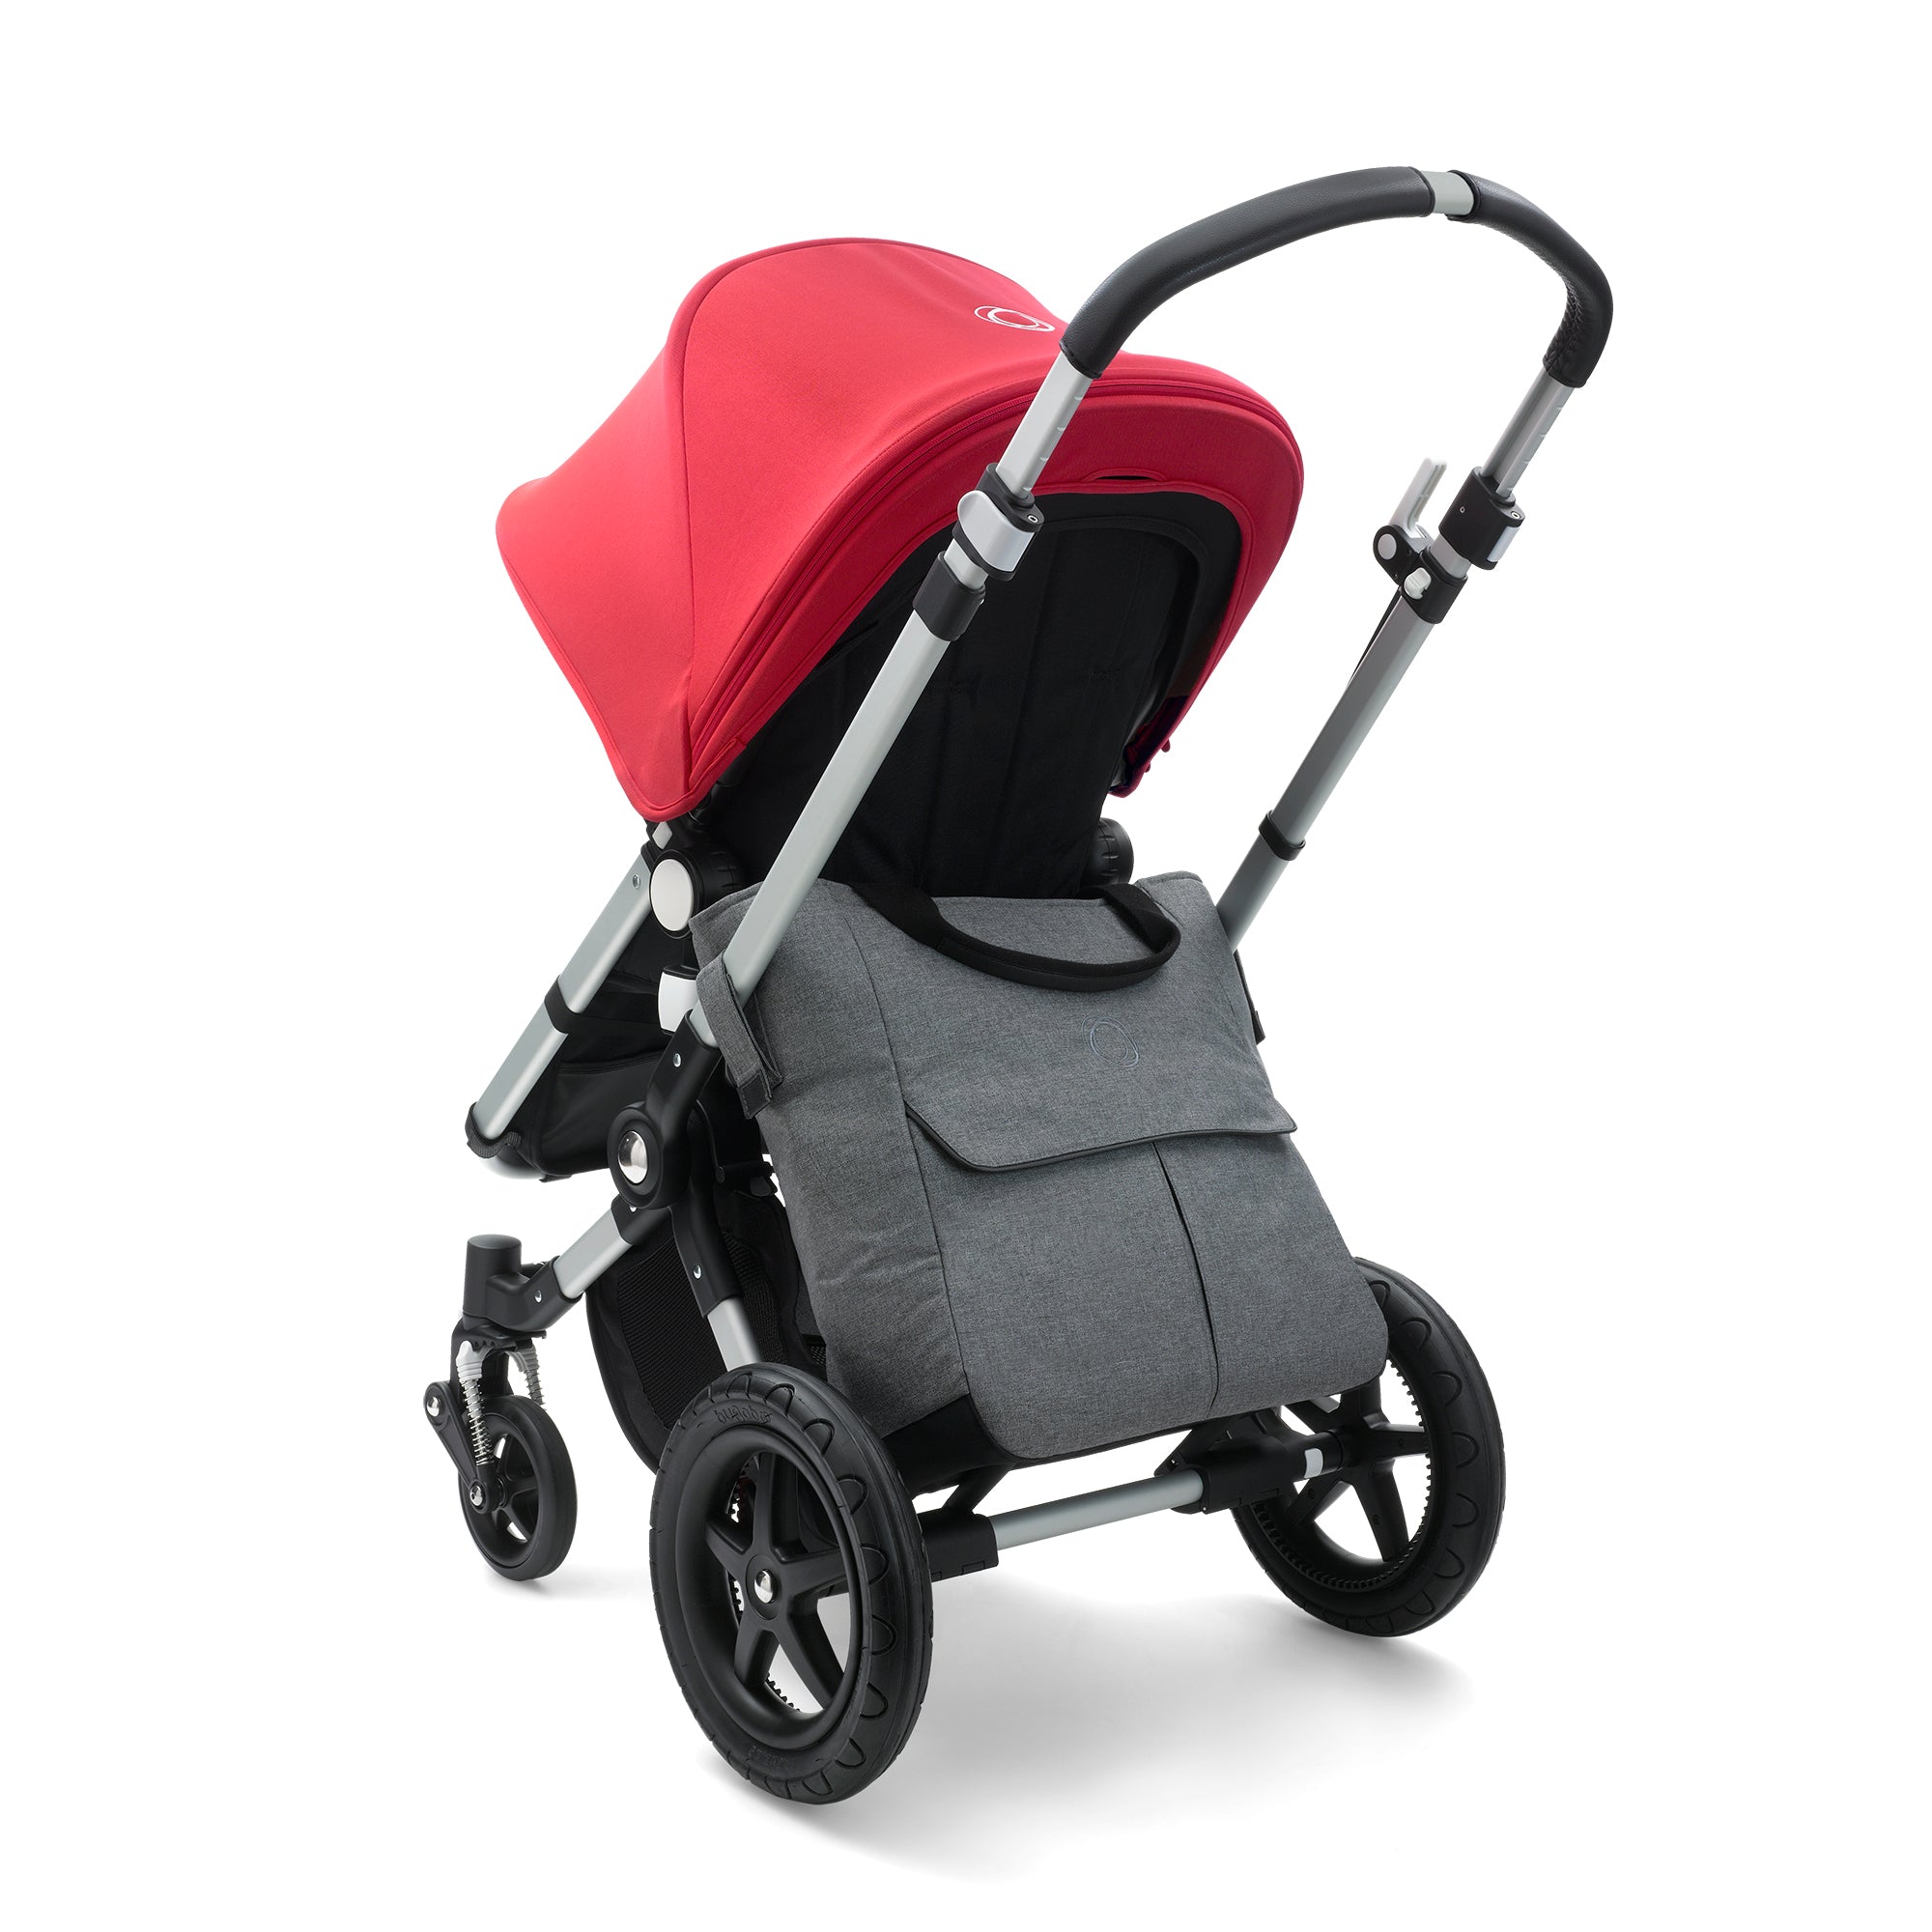 bugaboo mammoth bag review